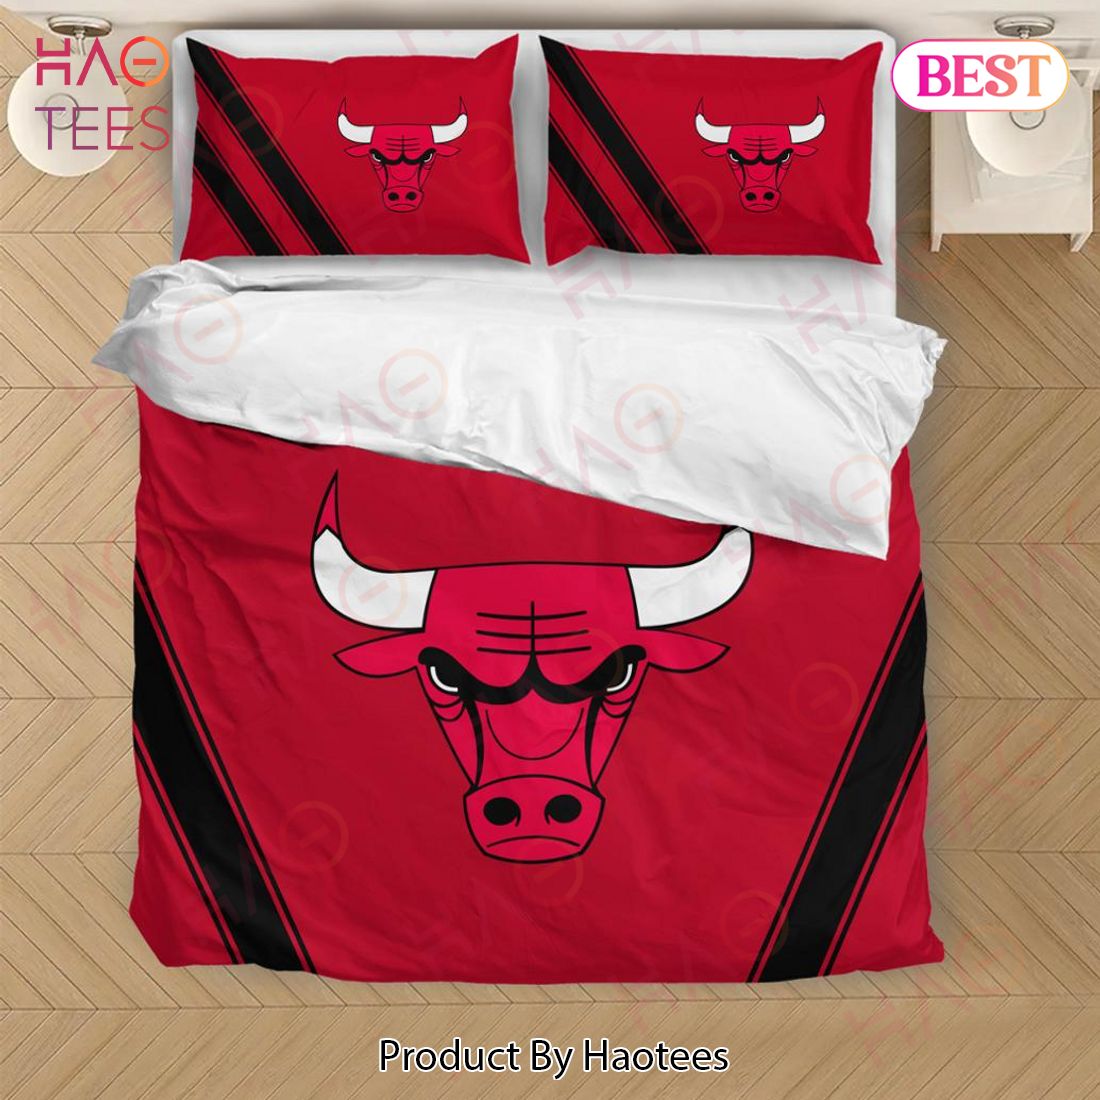 NBA Chicago Bulls Bedding Duvet Cover Limited Edition